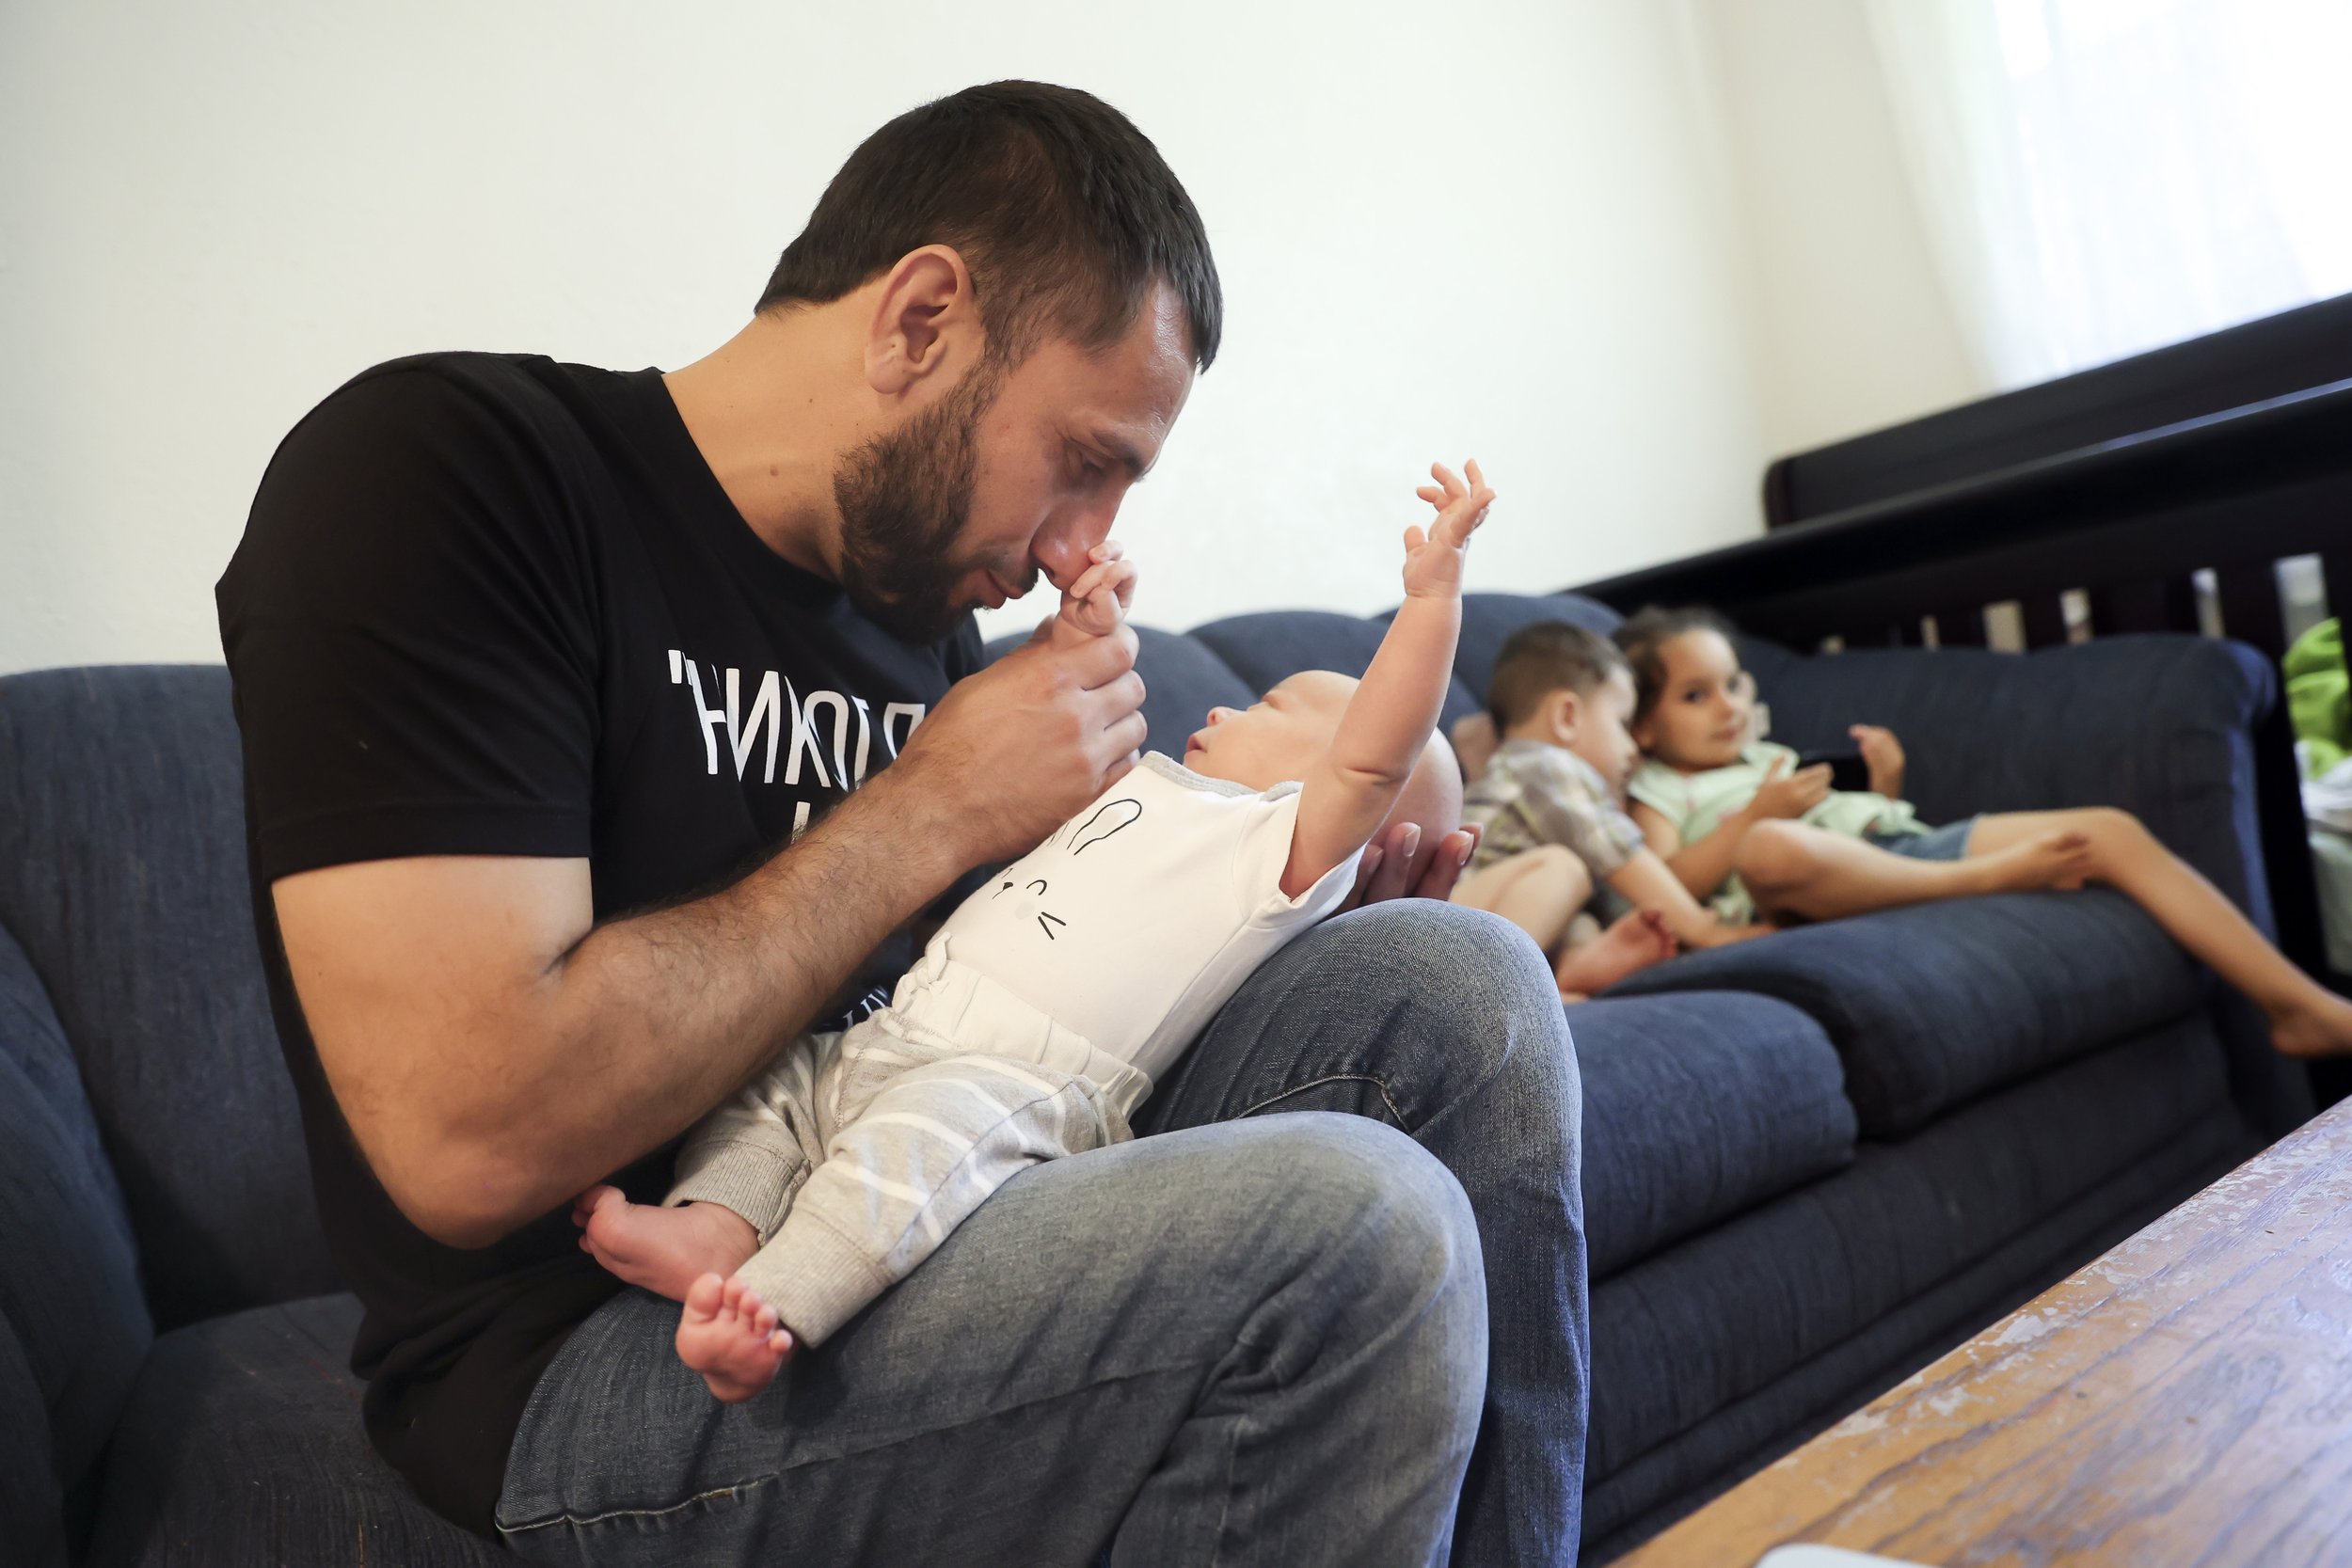  Najibullah Mohamamdi plays with his newborn son, Yusuf Mohammadi at home in Sacramento, Calif. on Tuesday, may 31, 2022. Najibullah Mohammadi, his wife Susan, their two young children Zahra and Yasar, and their soon-to-be born third child Yusuf  imm